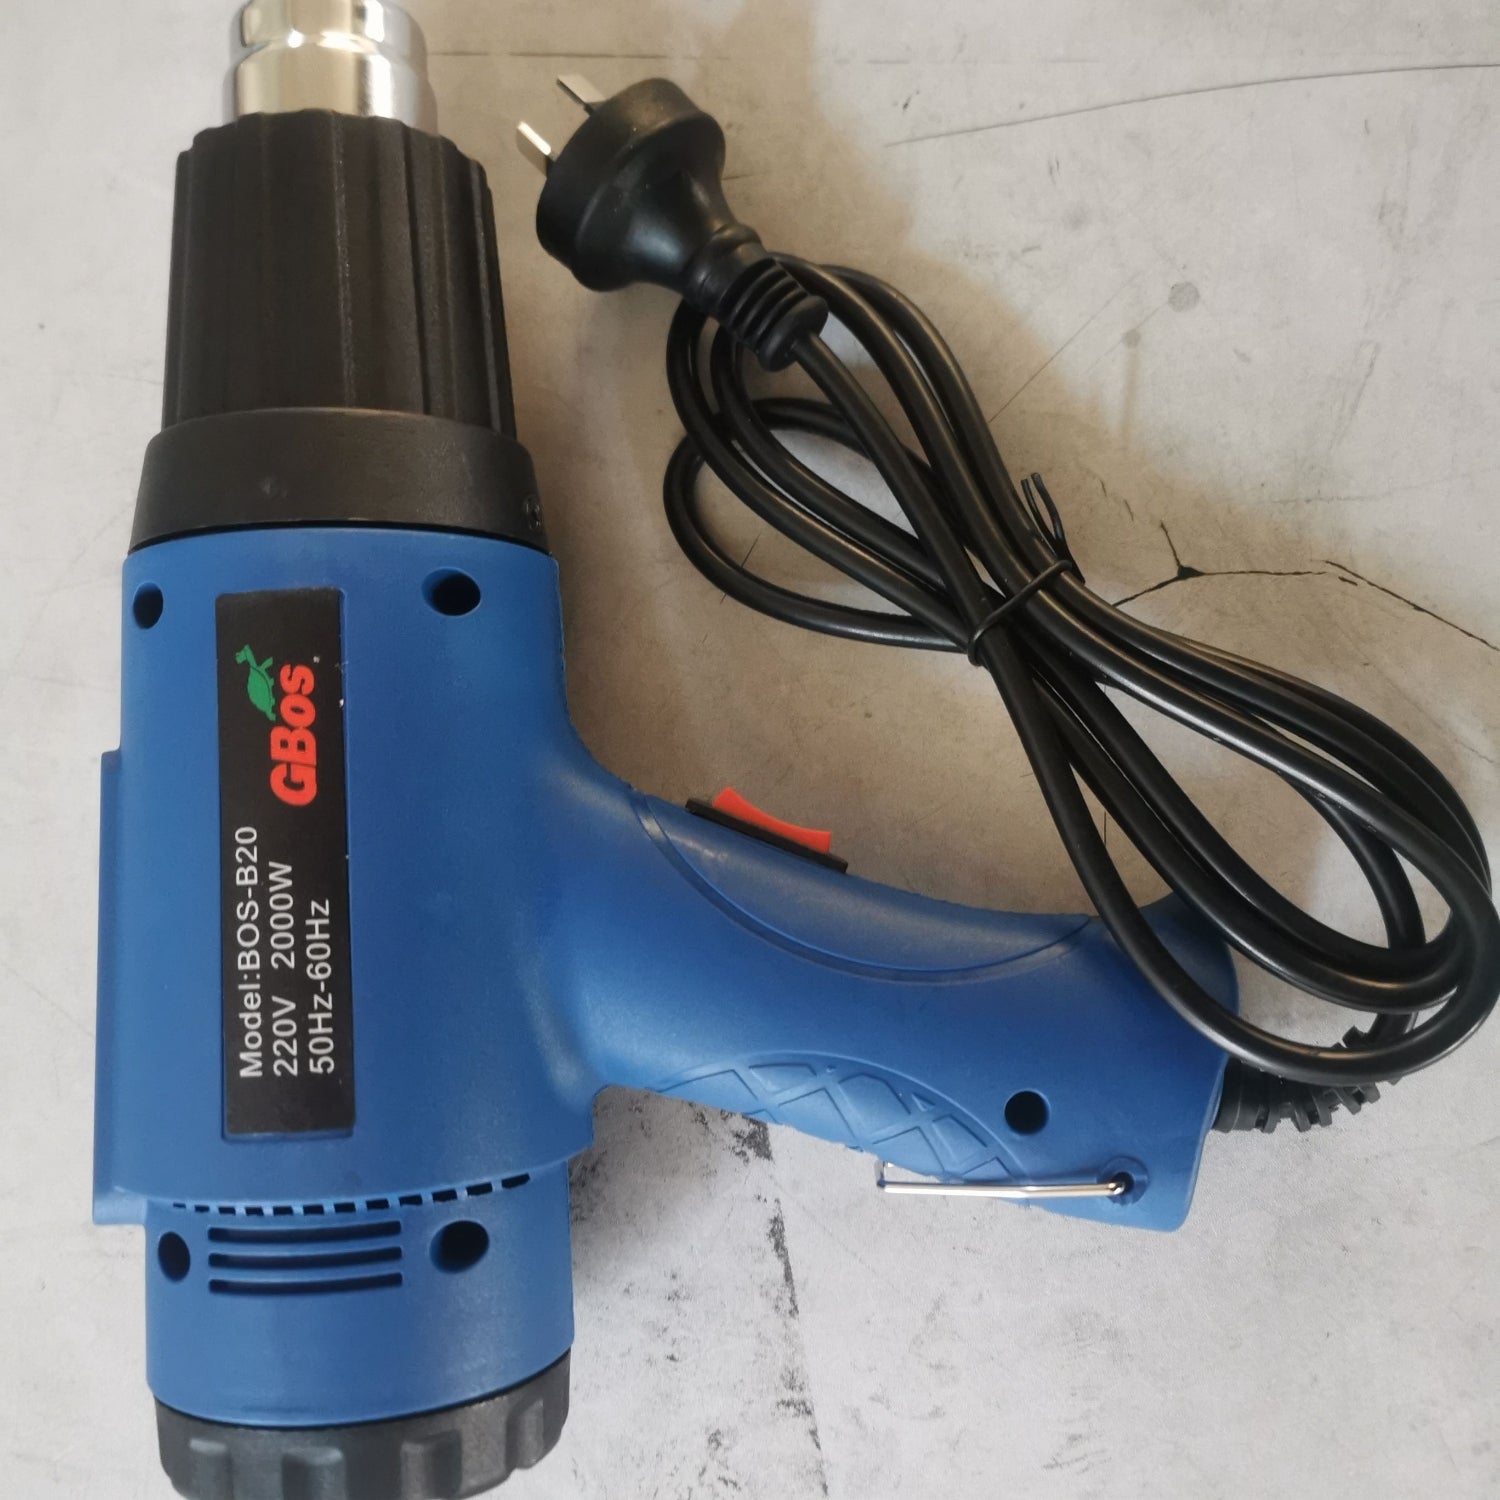 Powerful 2000W Electric Heat Gun with 9 Nozzles | Heating Tool